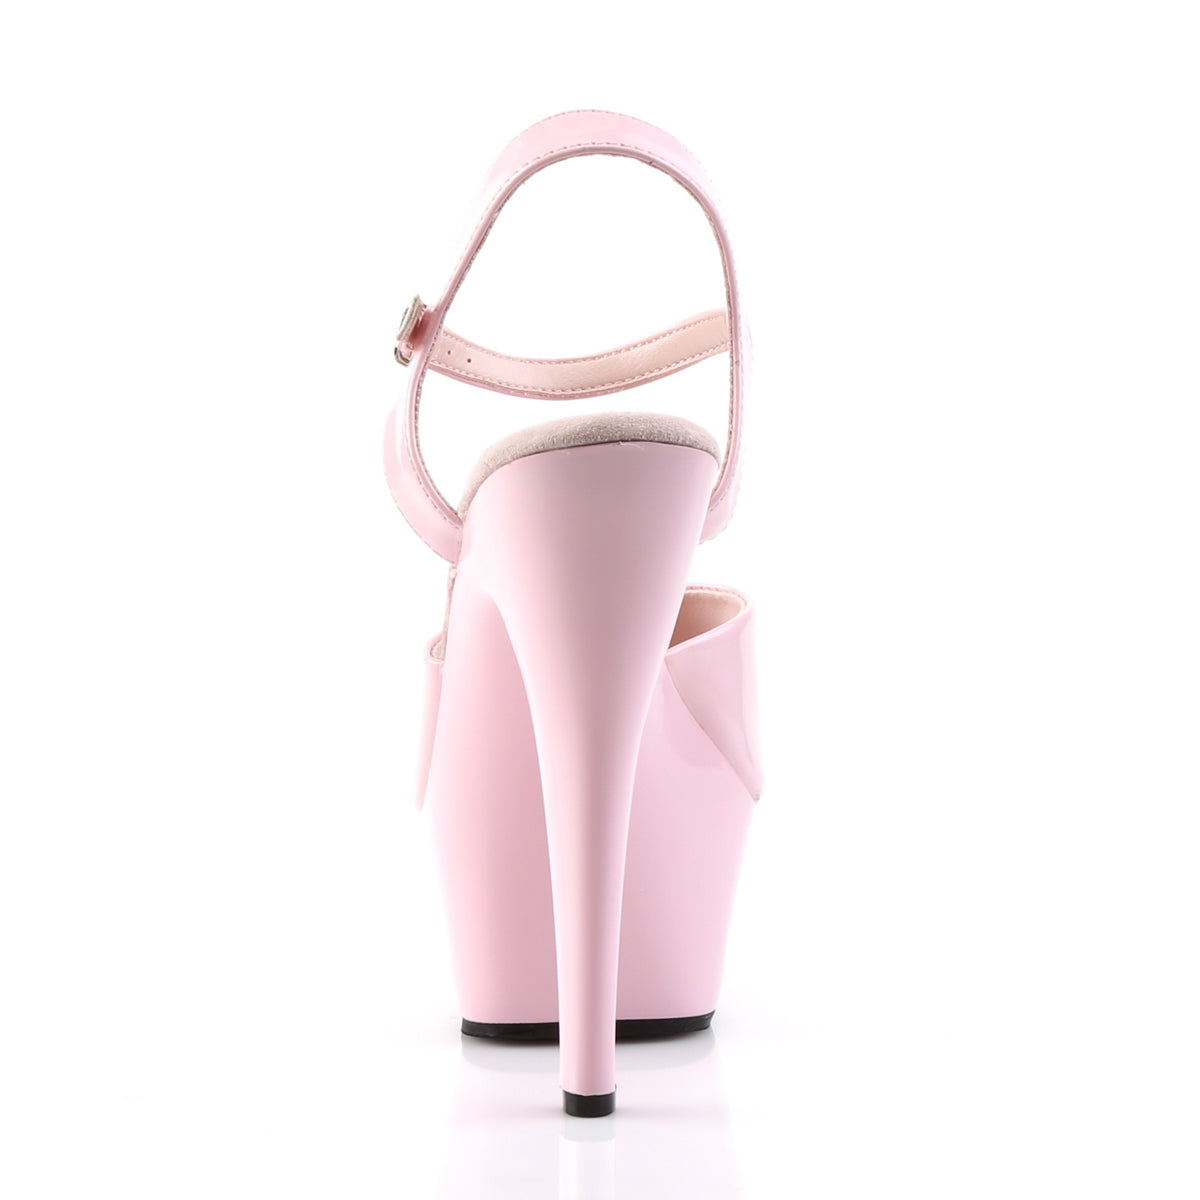 KISS-209 Pleaser 6" Heel Baby Pink Pole Shoes